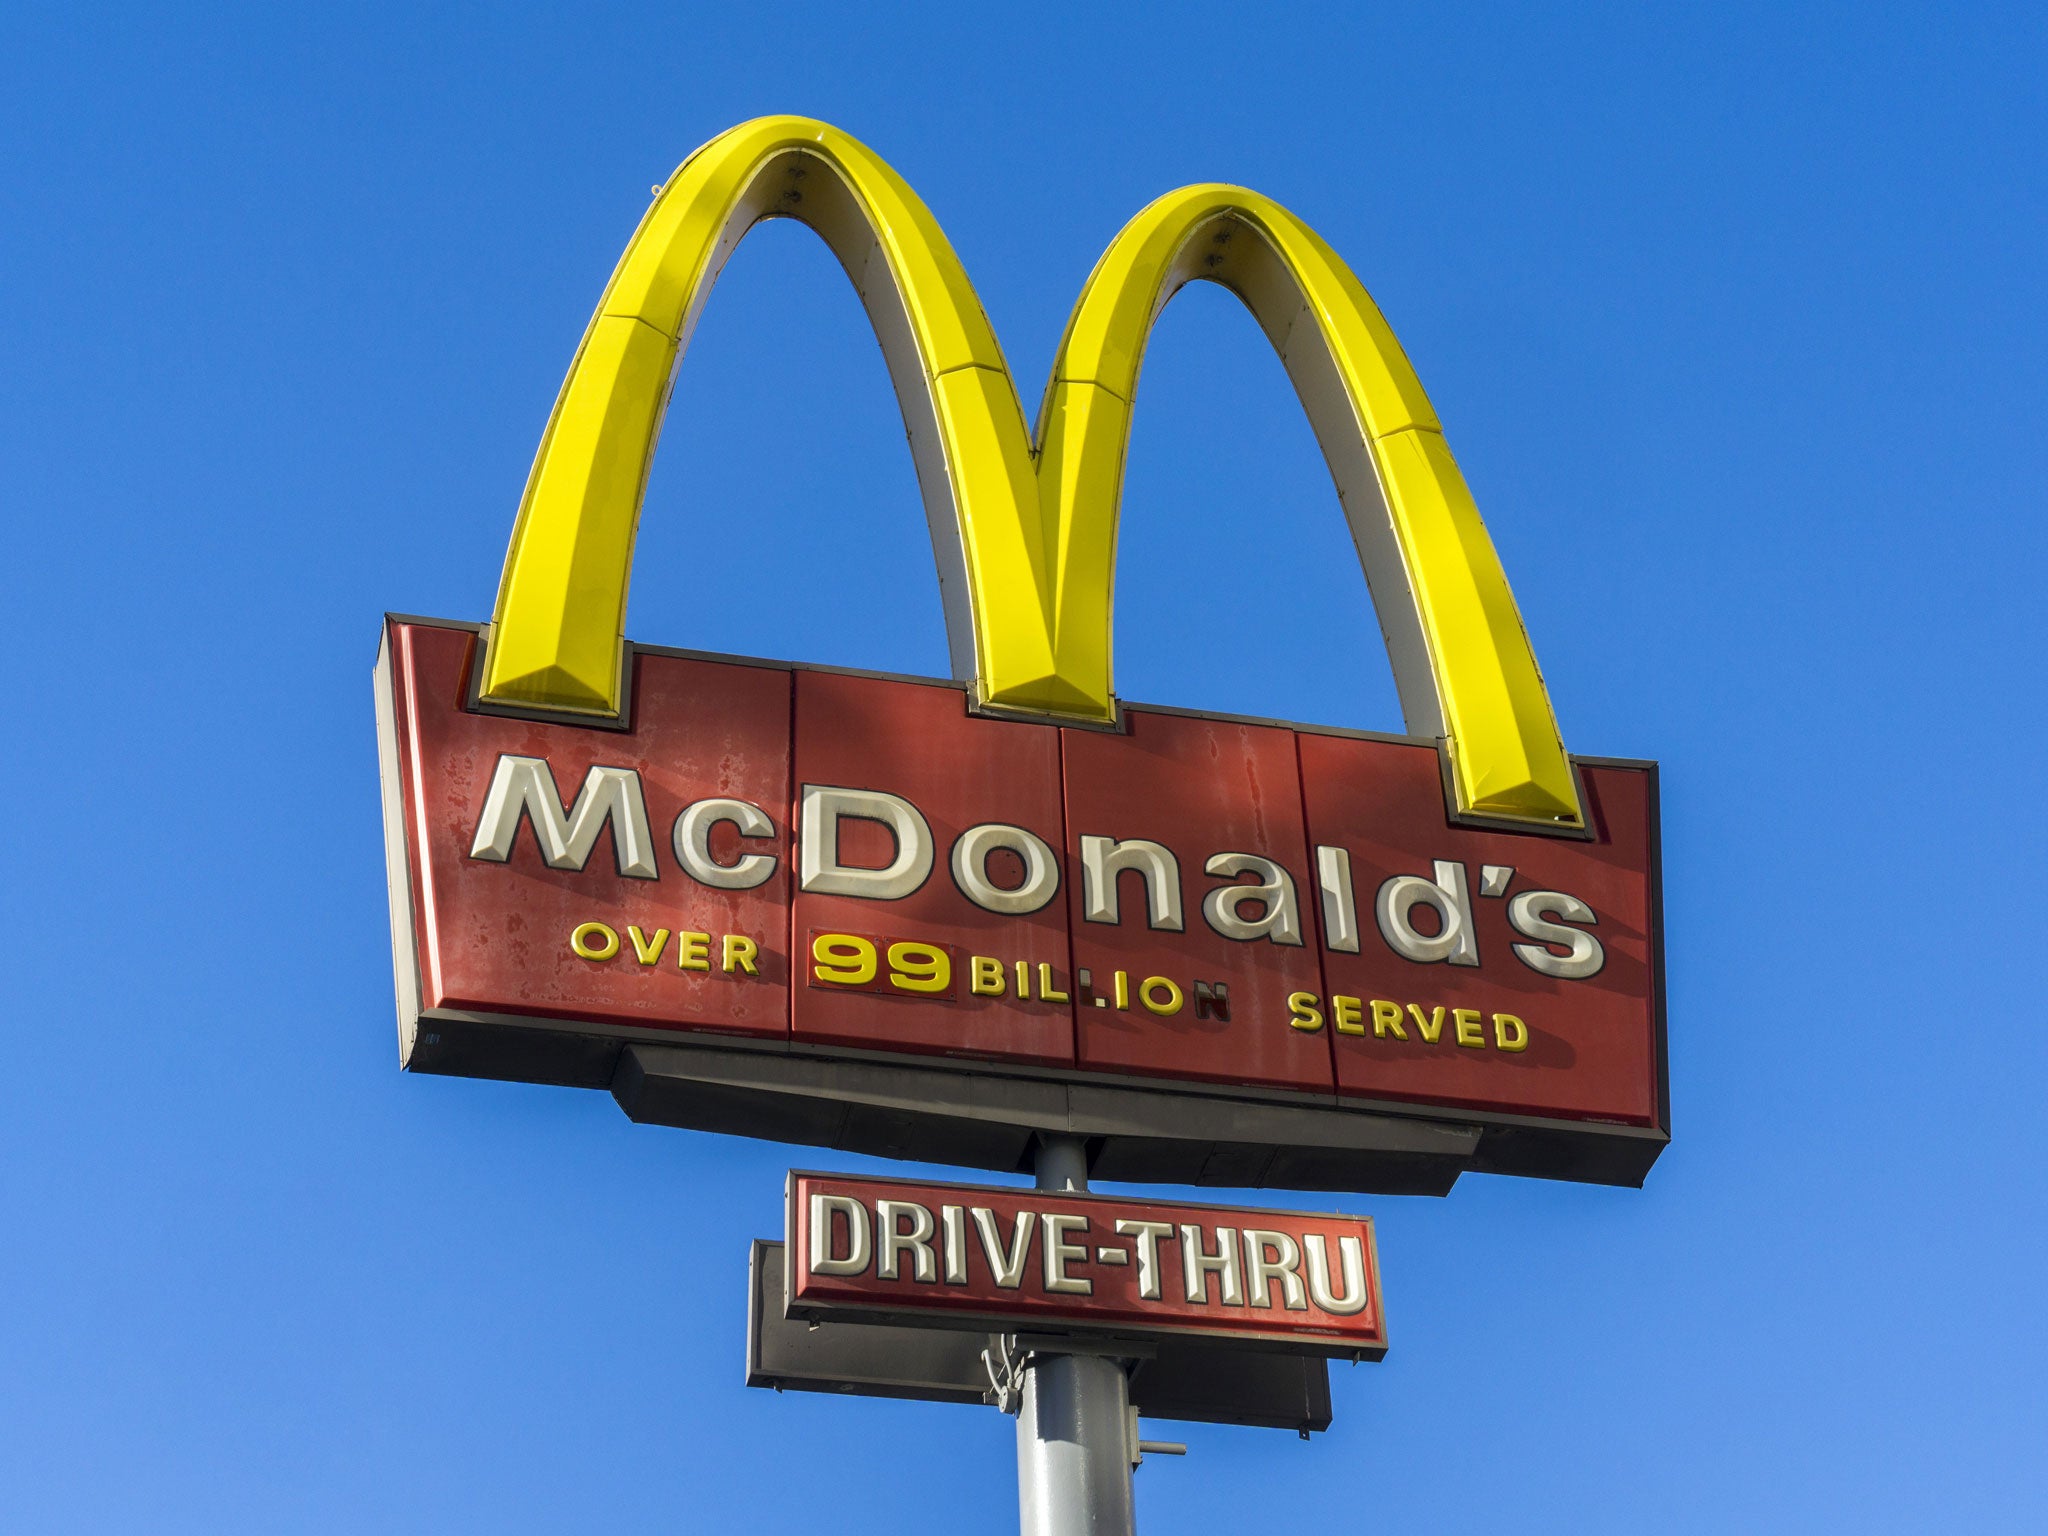 Oklahoma City reputedly had the highest density of fast food outlets in America, with 40 McDonald's restaurants alone